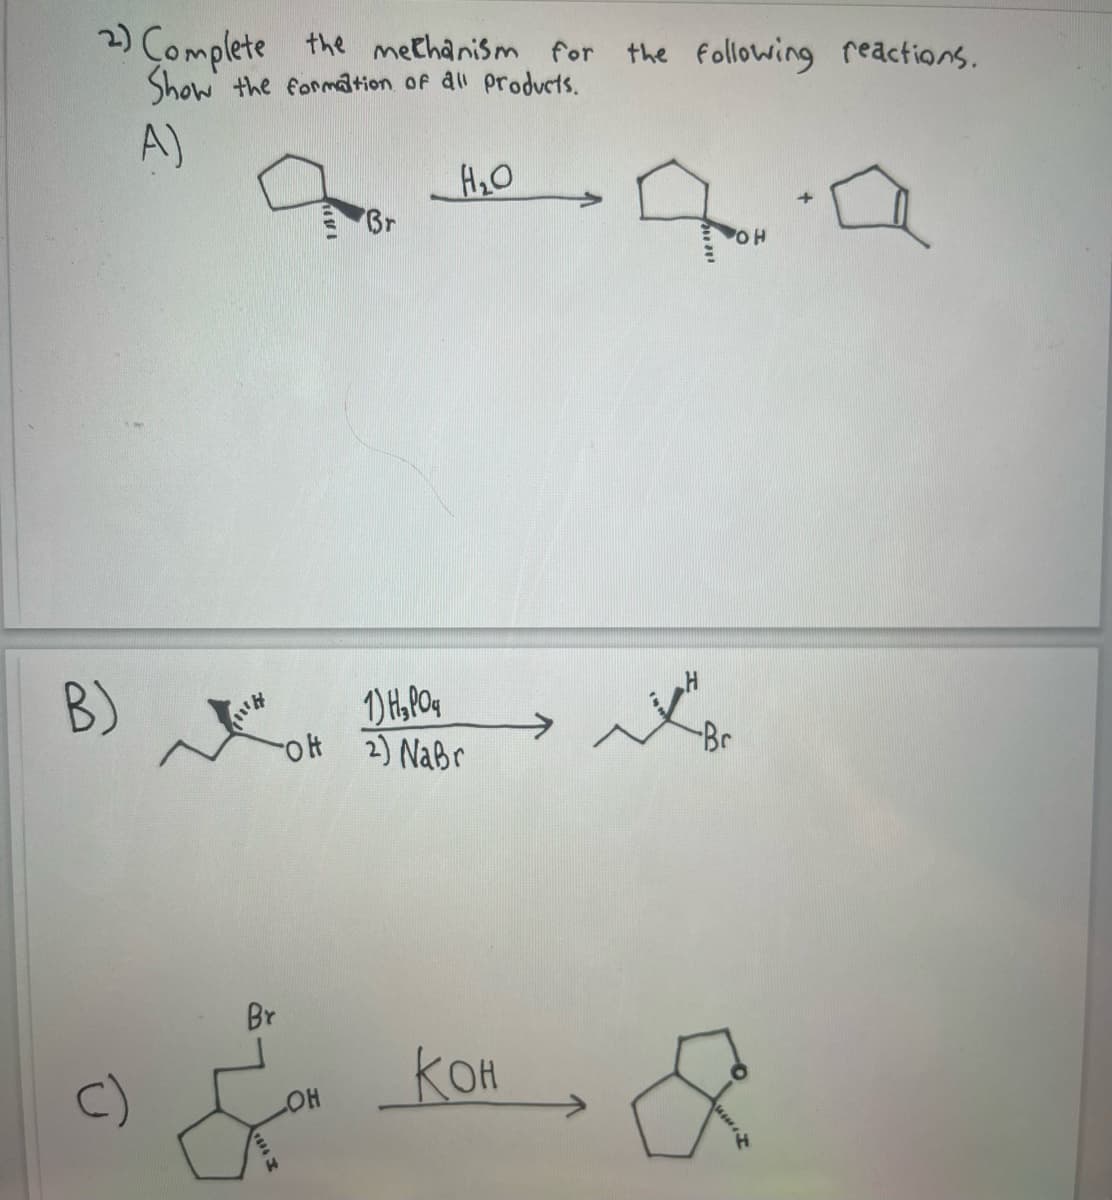 2) Complete the mechanism for the following reactions.
Show the formation of all products.
A)
B)
H
Br
Br
1) H₂PO4
-OH 2) Nabr
LOH
H₂O
Кон
он
-Br
&
+